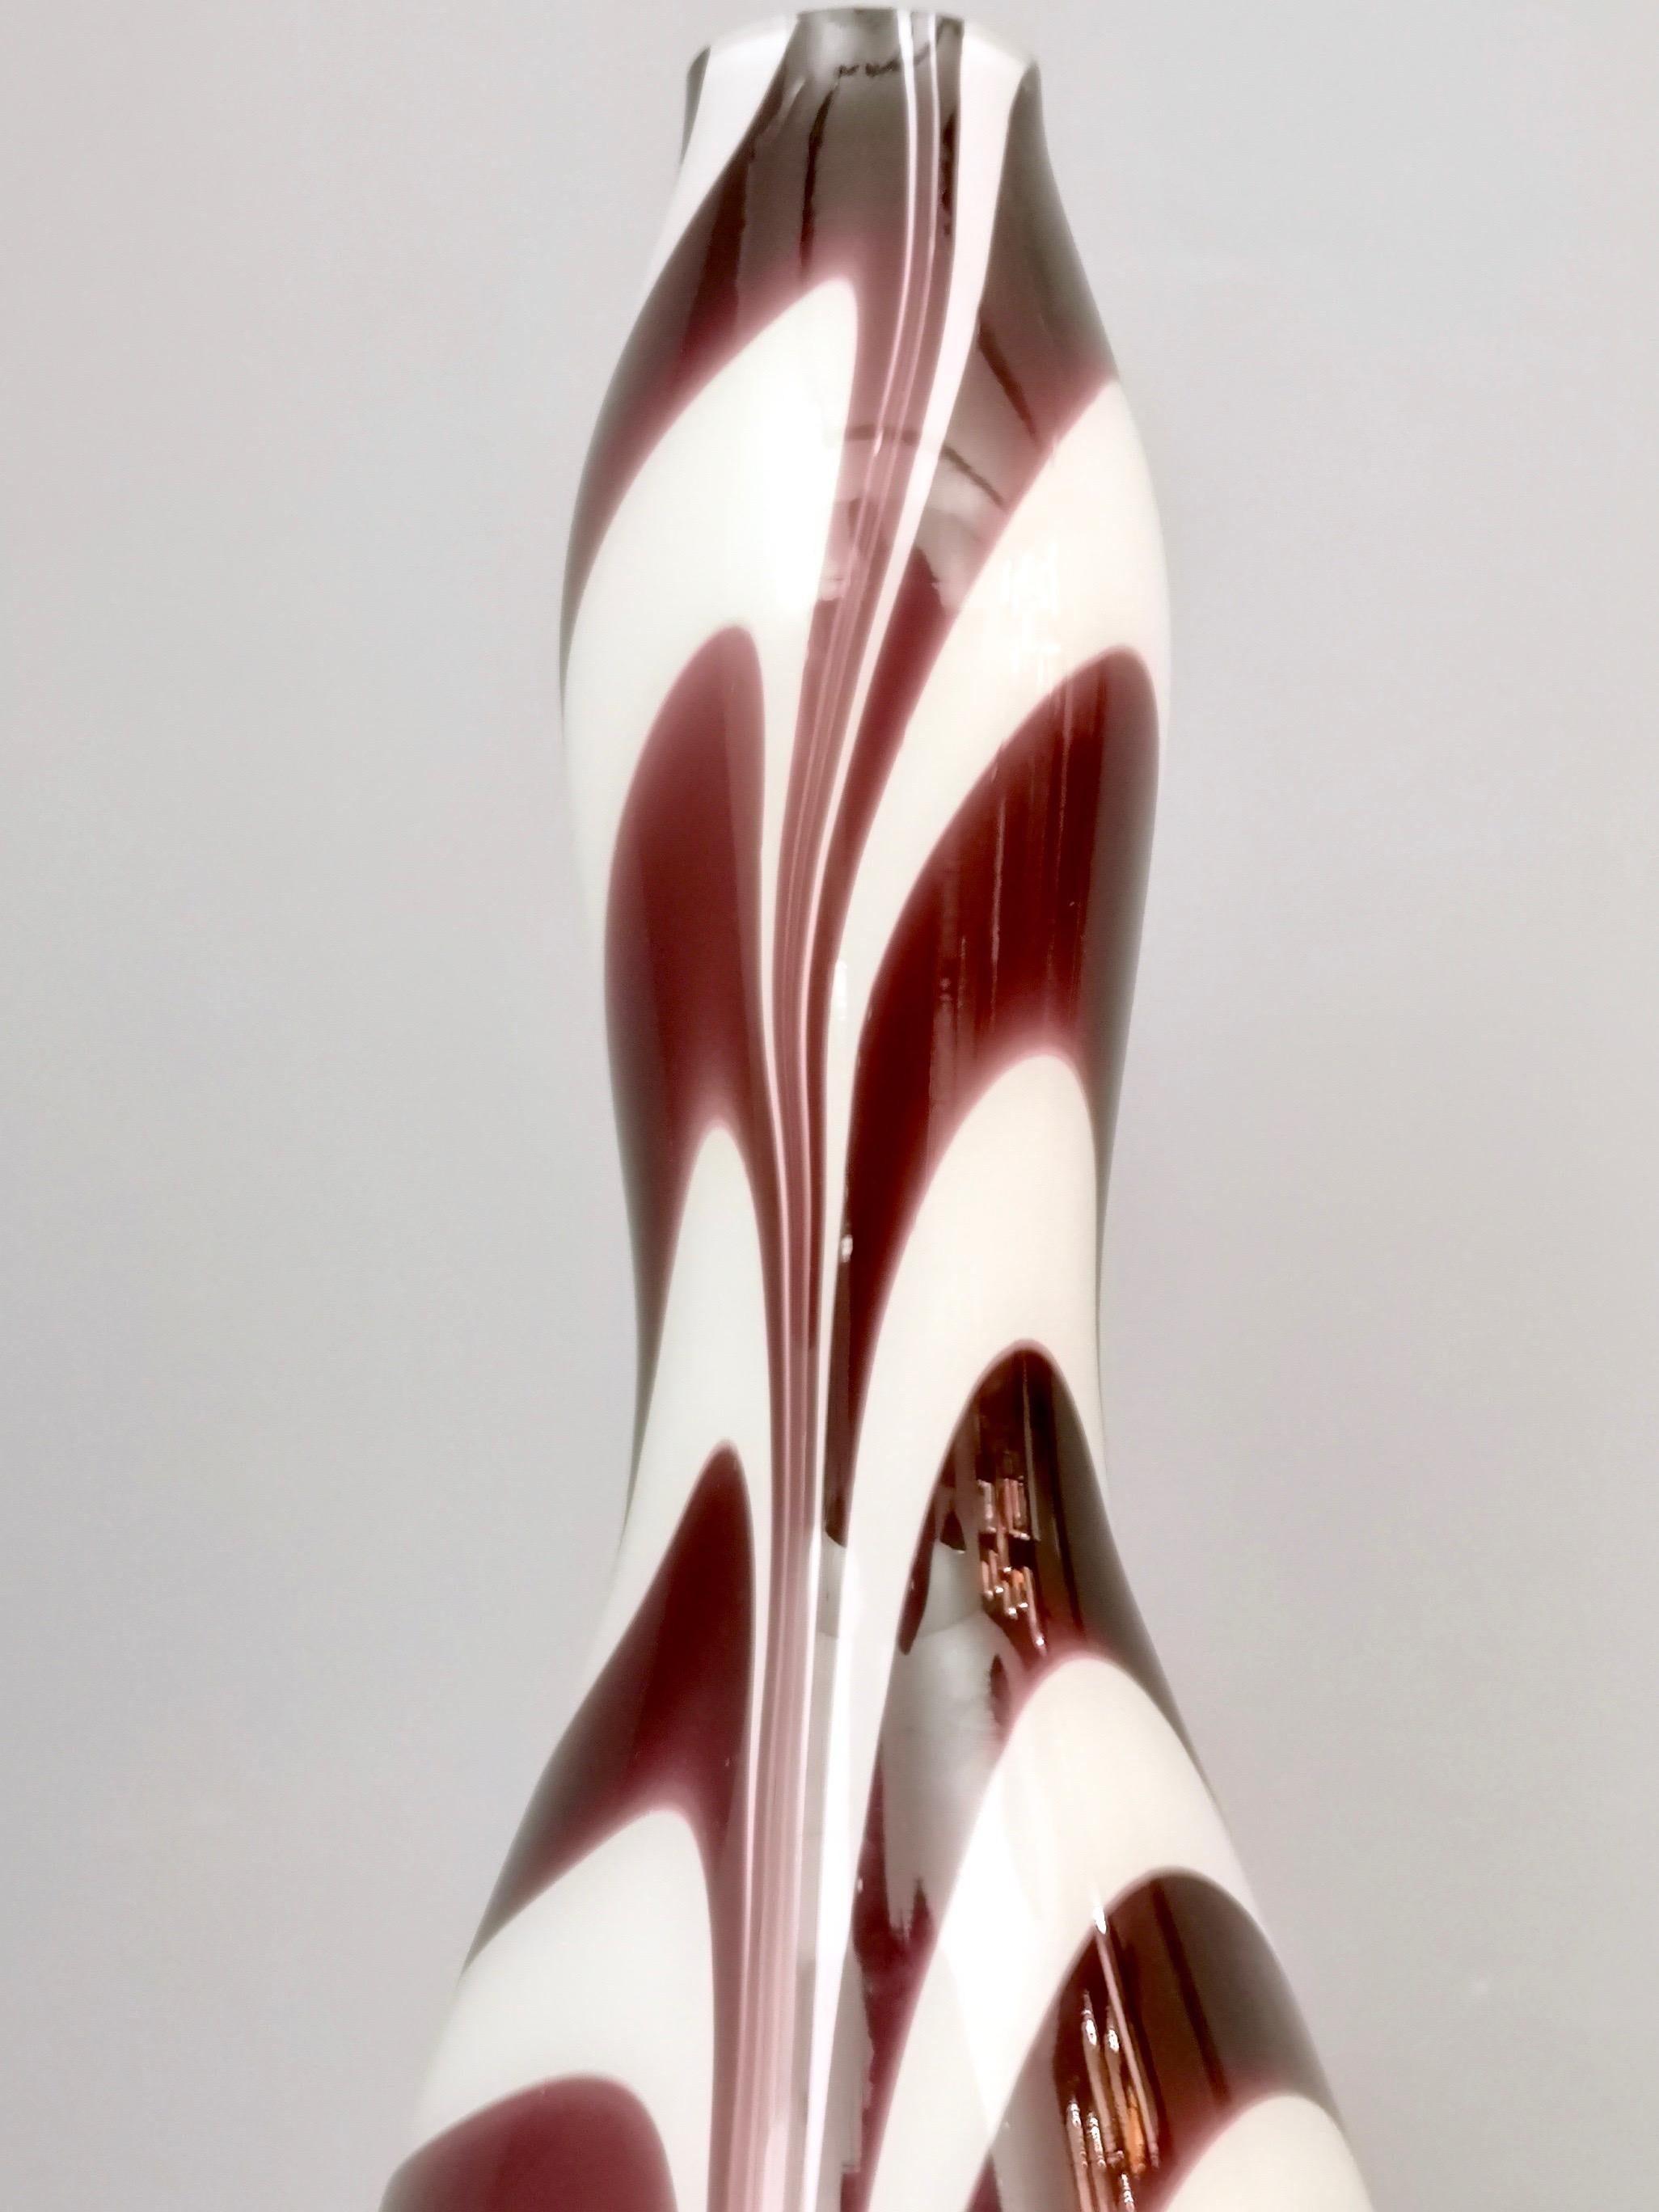 Late 20th Century Murano Glass Vase “Wave” by Carlo Moretti, Italy, 1970s